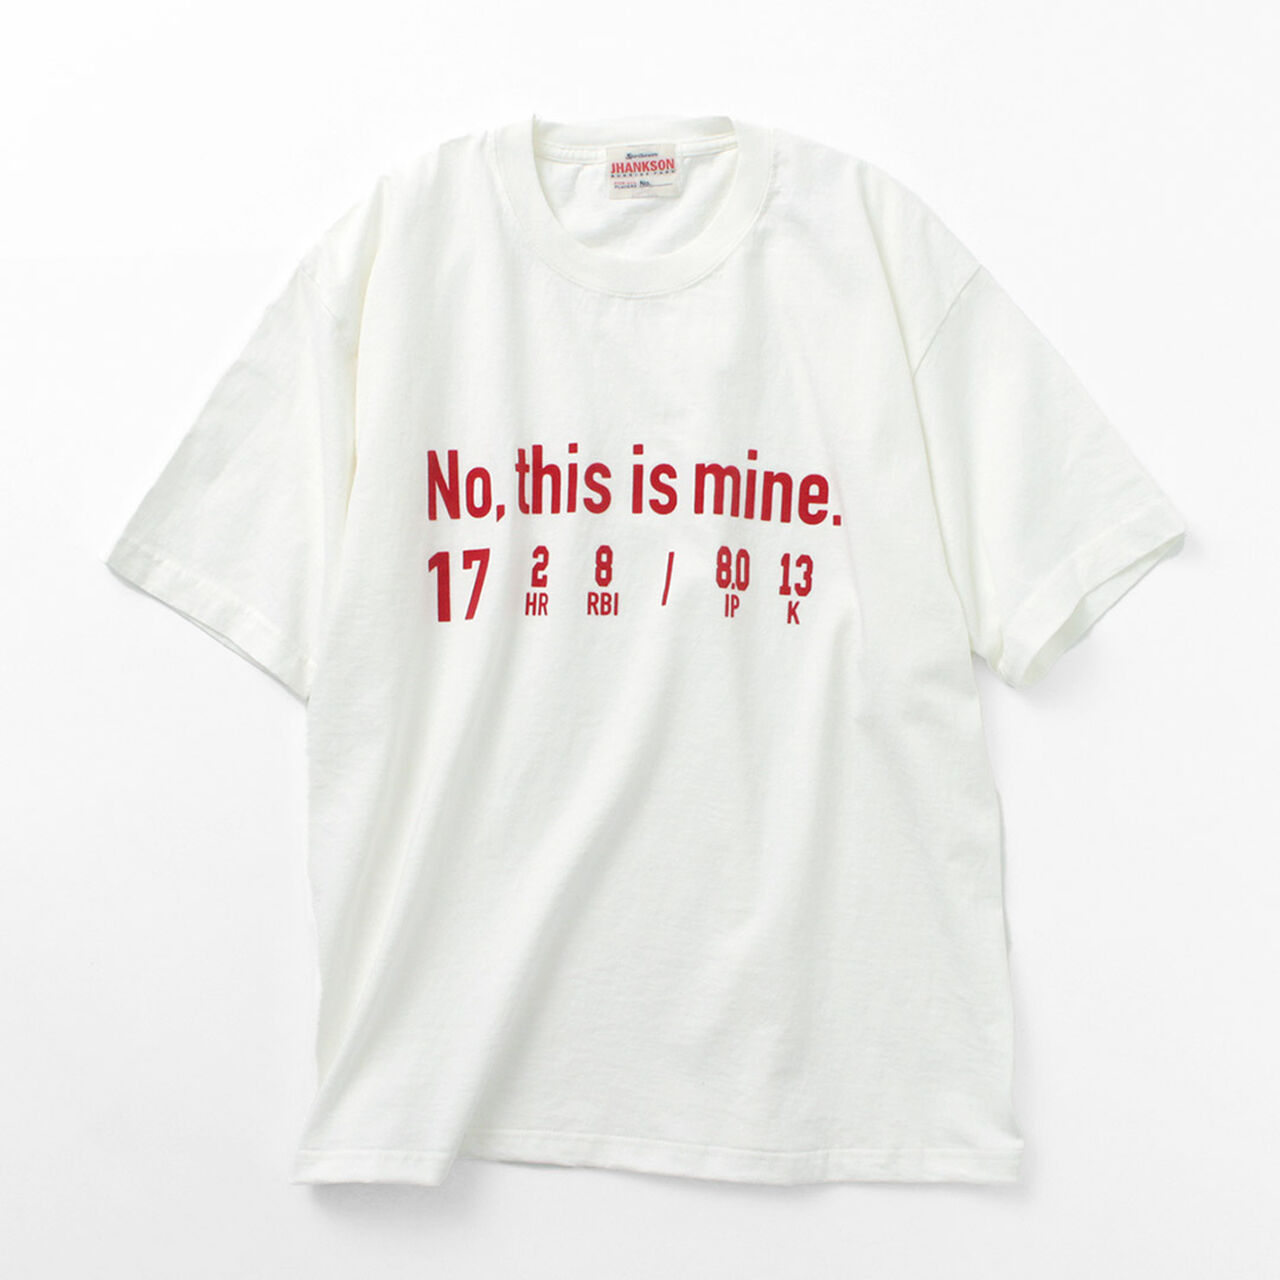 No, This is Mine short sleeve T-shirt,, large image number 3